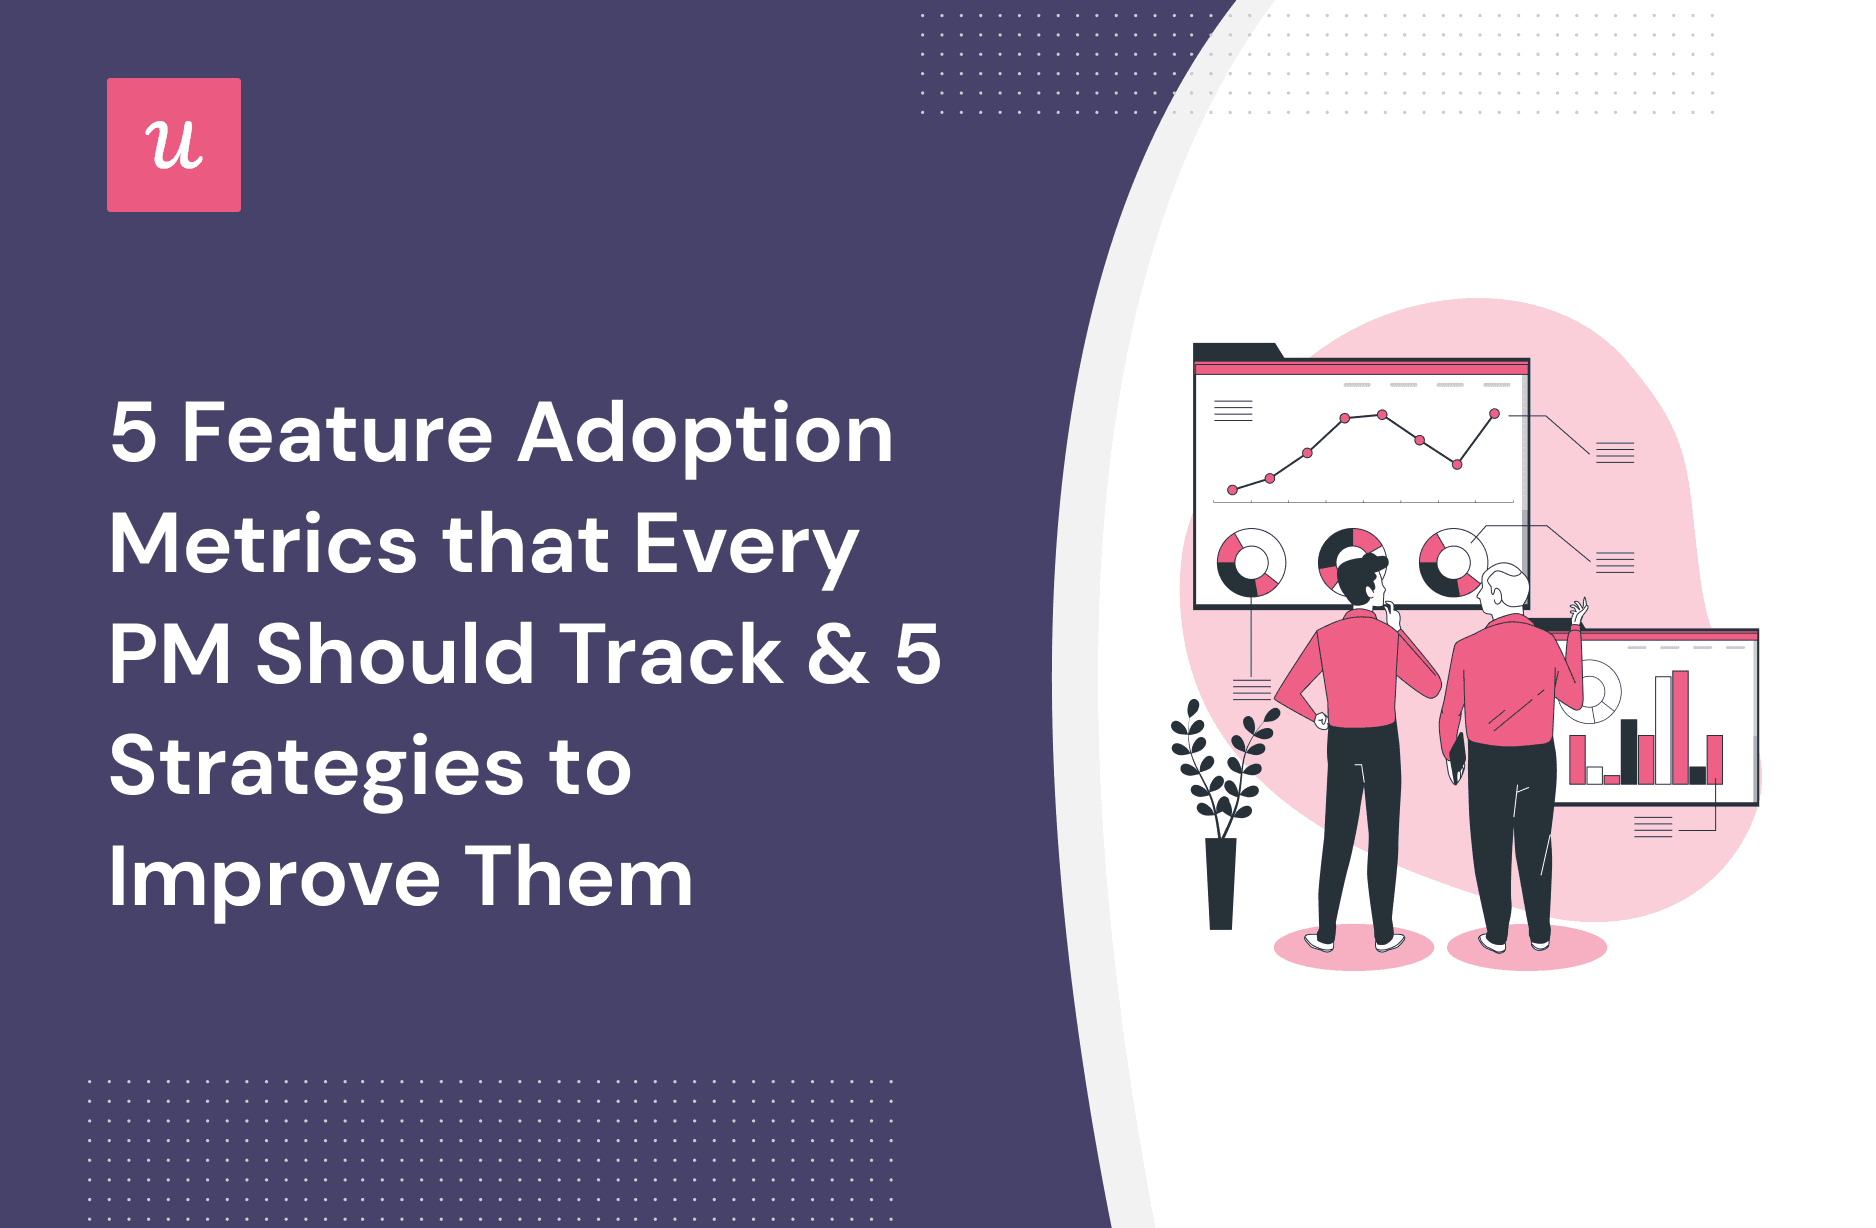 5 Feature Adoption Metrics That Every PM Should Track & 5 Strategies To Improve Them cover